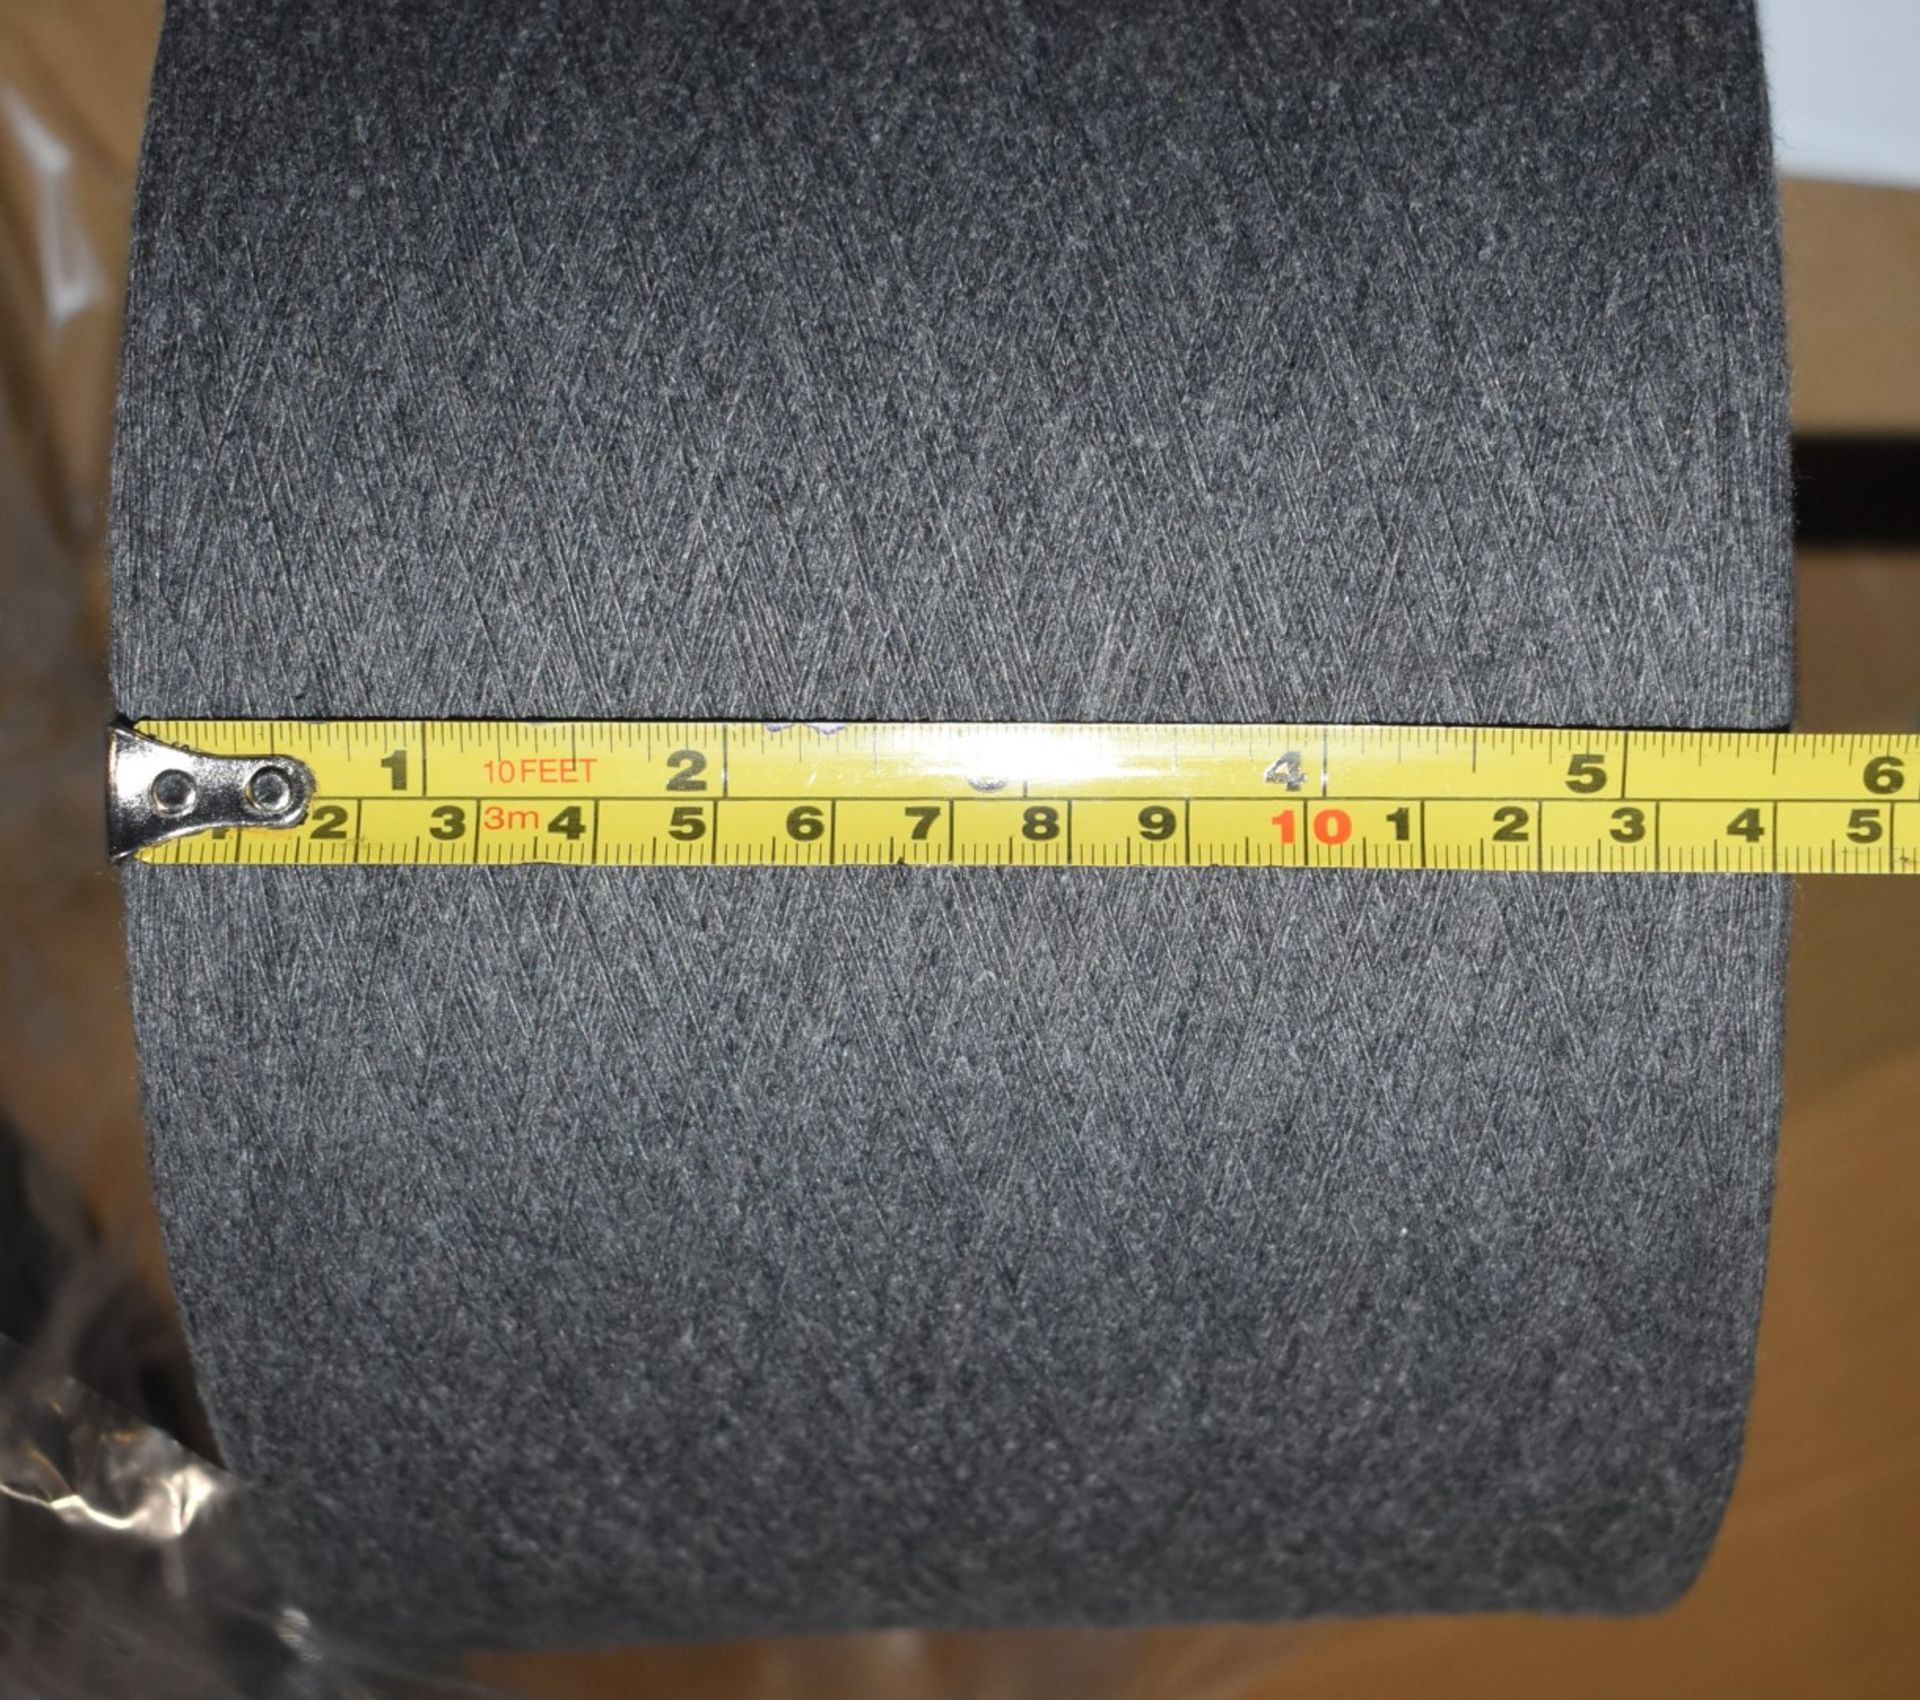 1 x Cone of 1/13 MicroCotton Knitting Yarn - Mid Grey - Approx Weight: 2,500g - New Stock ABL Yarn - Image 11 of 18